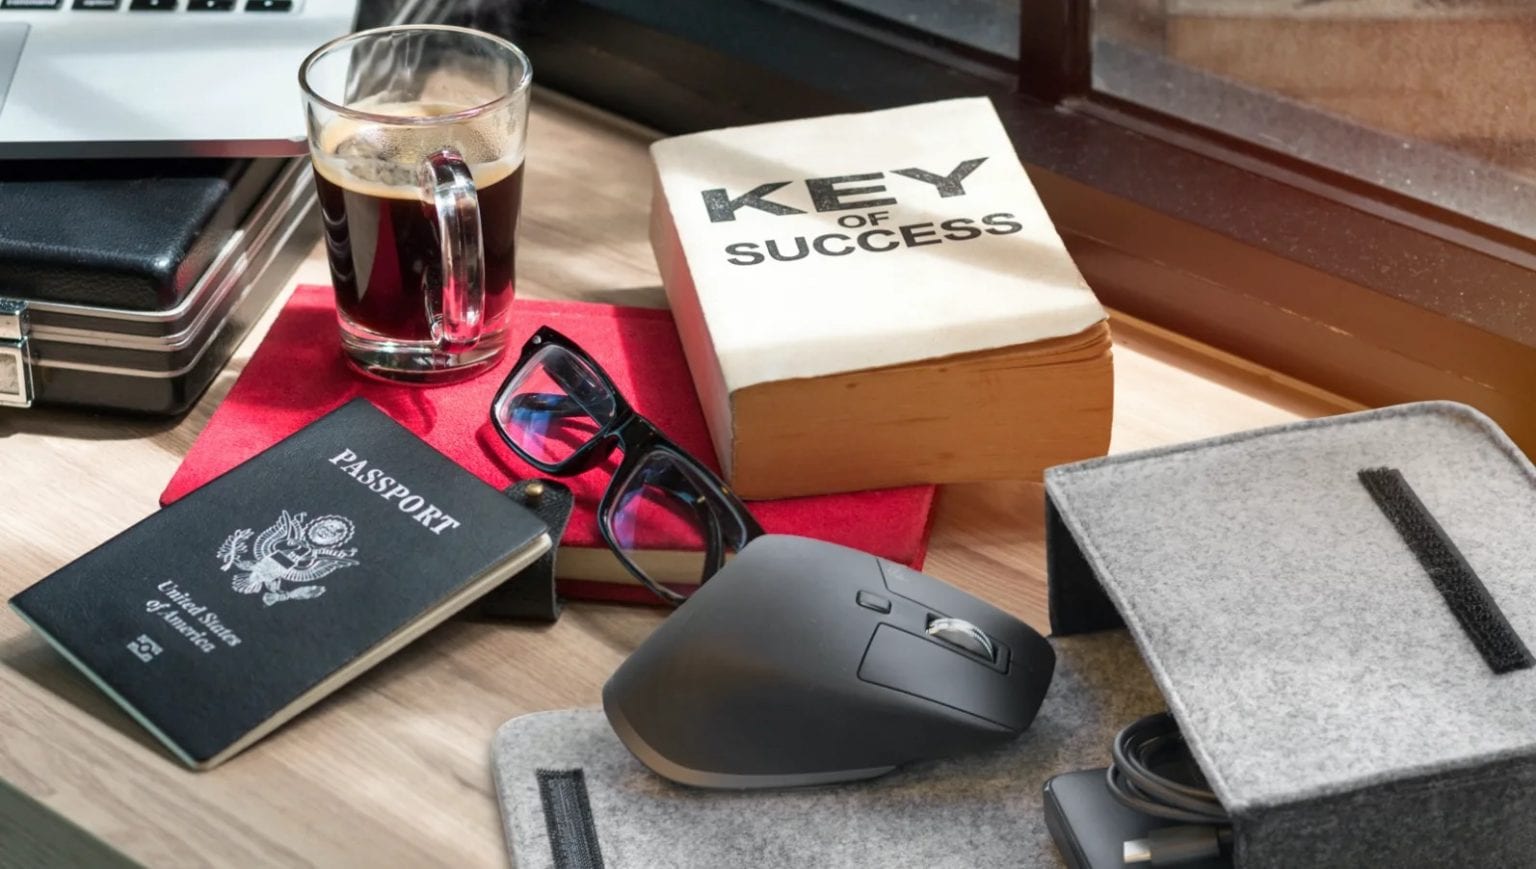 Your Logitech mouse is ready to hit the road with the new Logitech MX Travel Case.